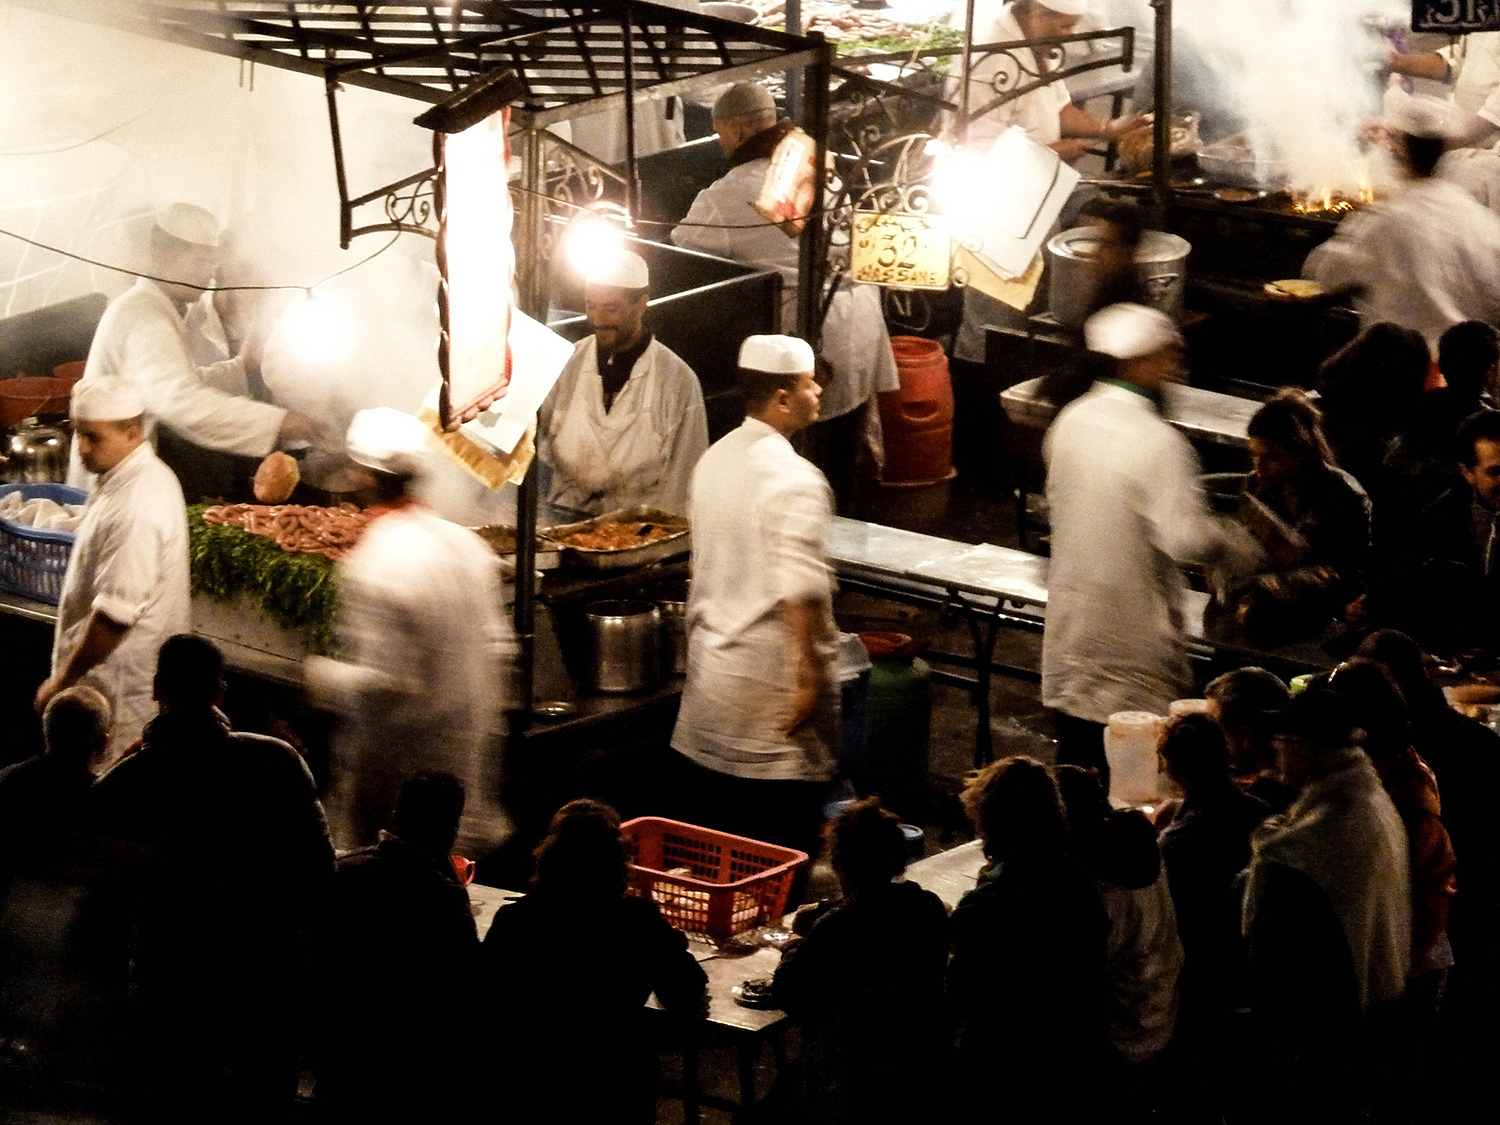 <p>Marrakech's Jamaa el Fna is a central square that constantly whirls with activity. Here, cooks prepare meals at the lively food stalls.</p>